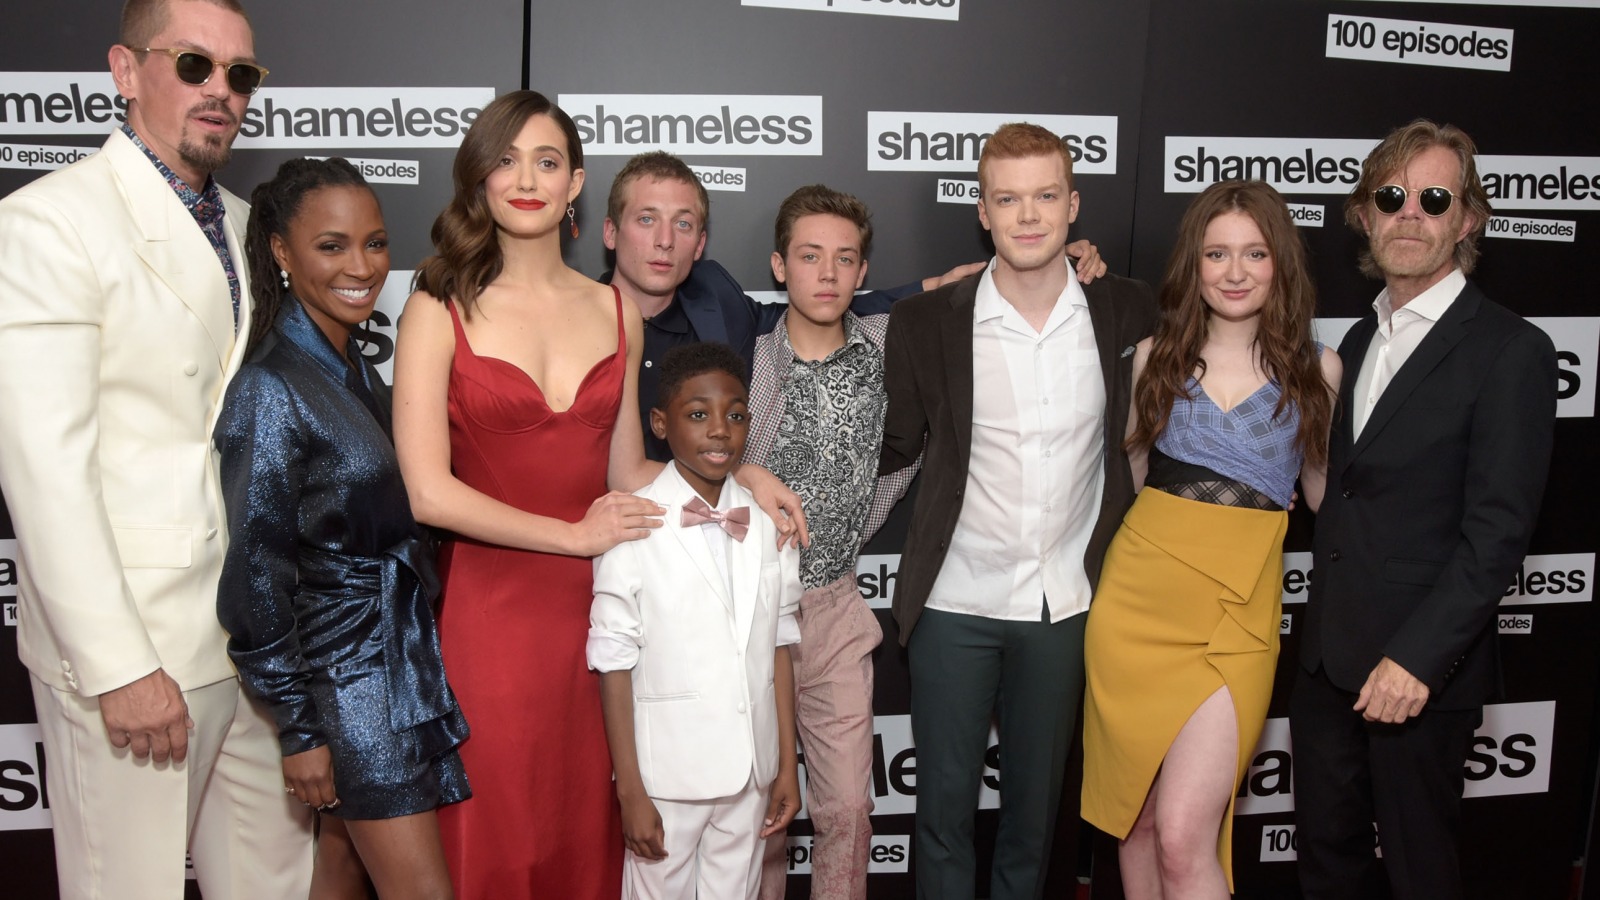 The Real Life Partners Of The Shameless Cast